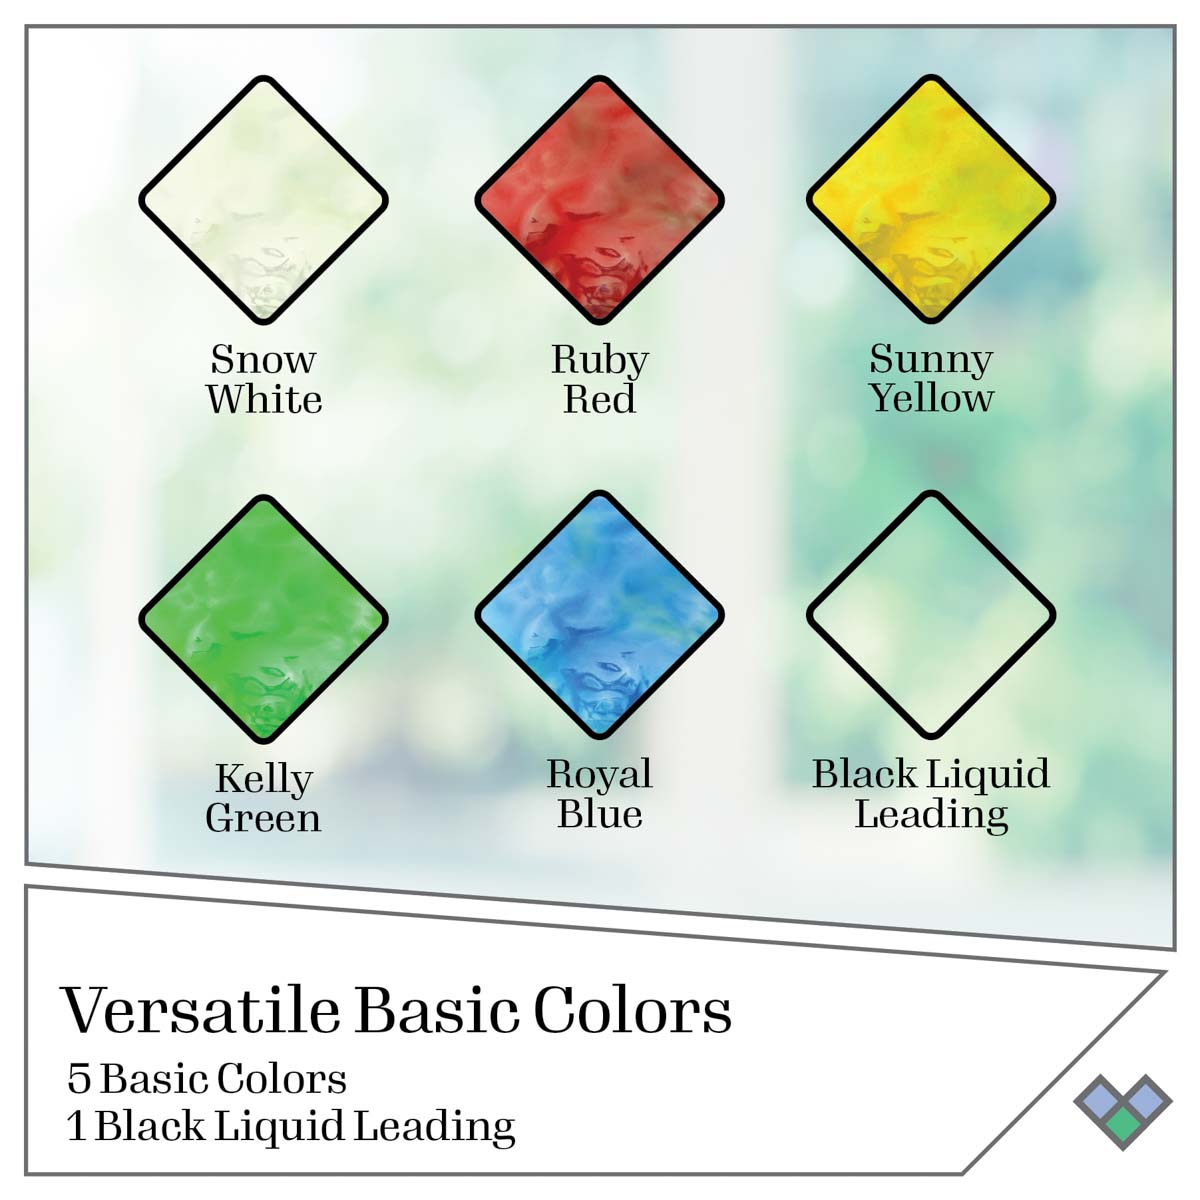 Leaf Green C2 Stained Glass Window Paints - 40125 - Leaf Green Paint, Leaf  Green Color, Glass Design C2 Paint, 105632 